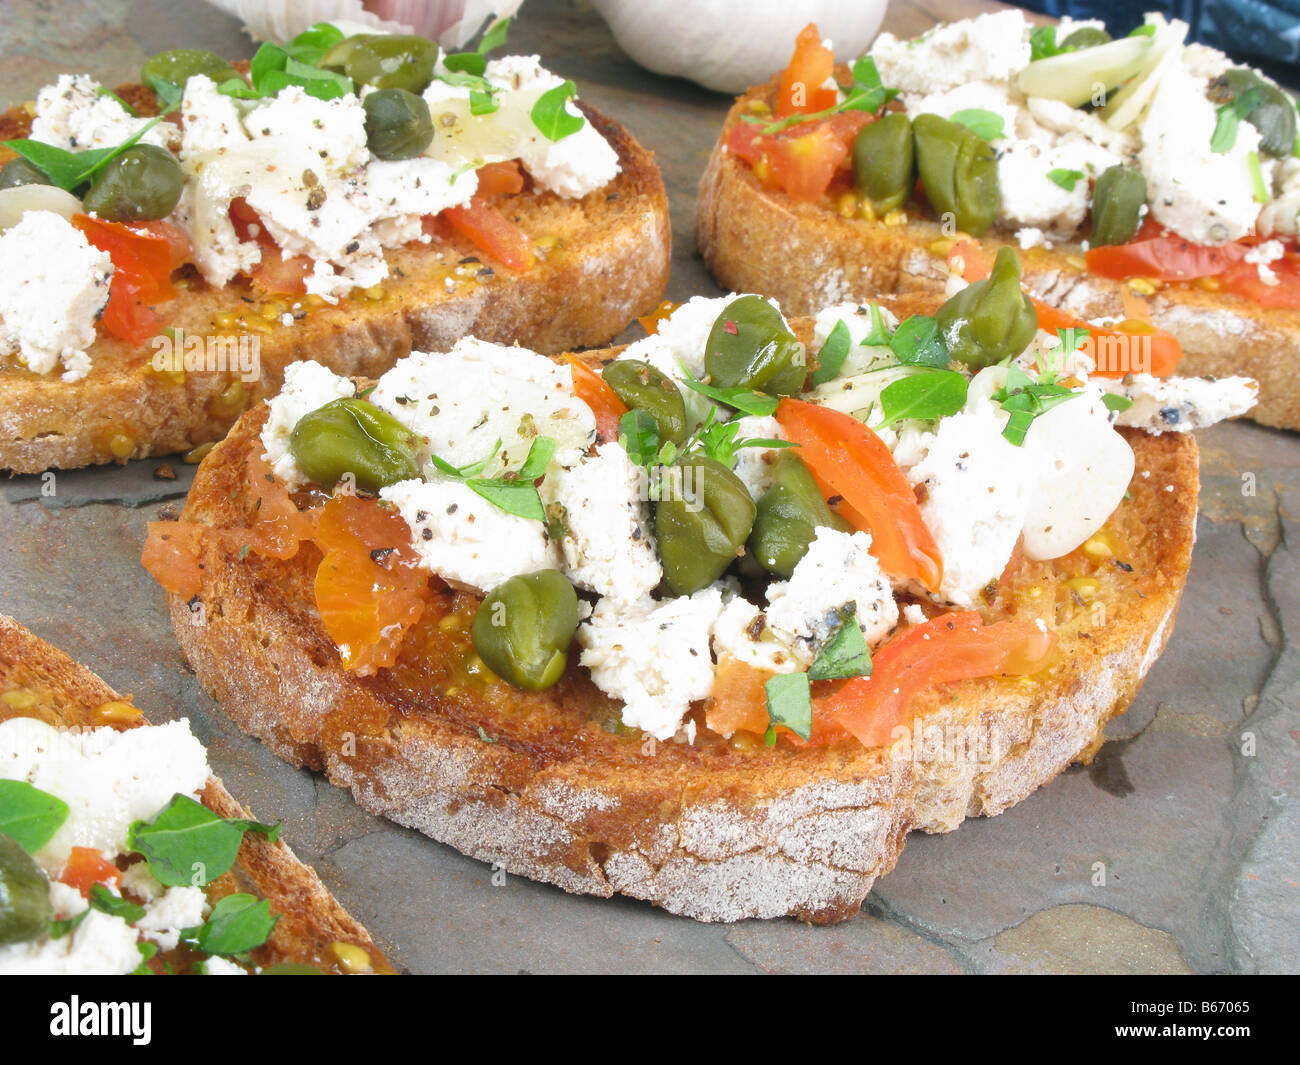 Maltese light meal of hobz-bi-zejt (bruschetta-style bread with oil), with tomatoes, capers, garlic and pepper gbejnet (cheese) Stock Photo